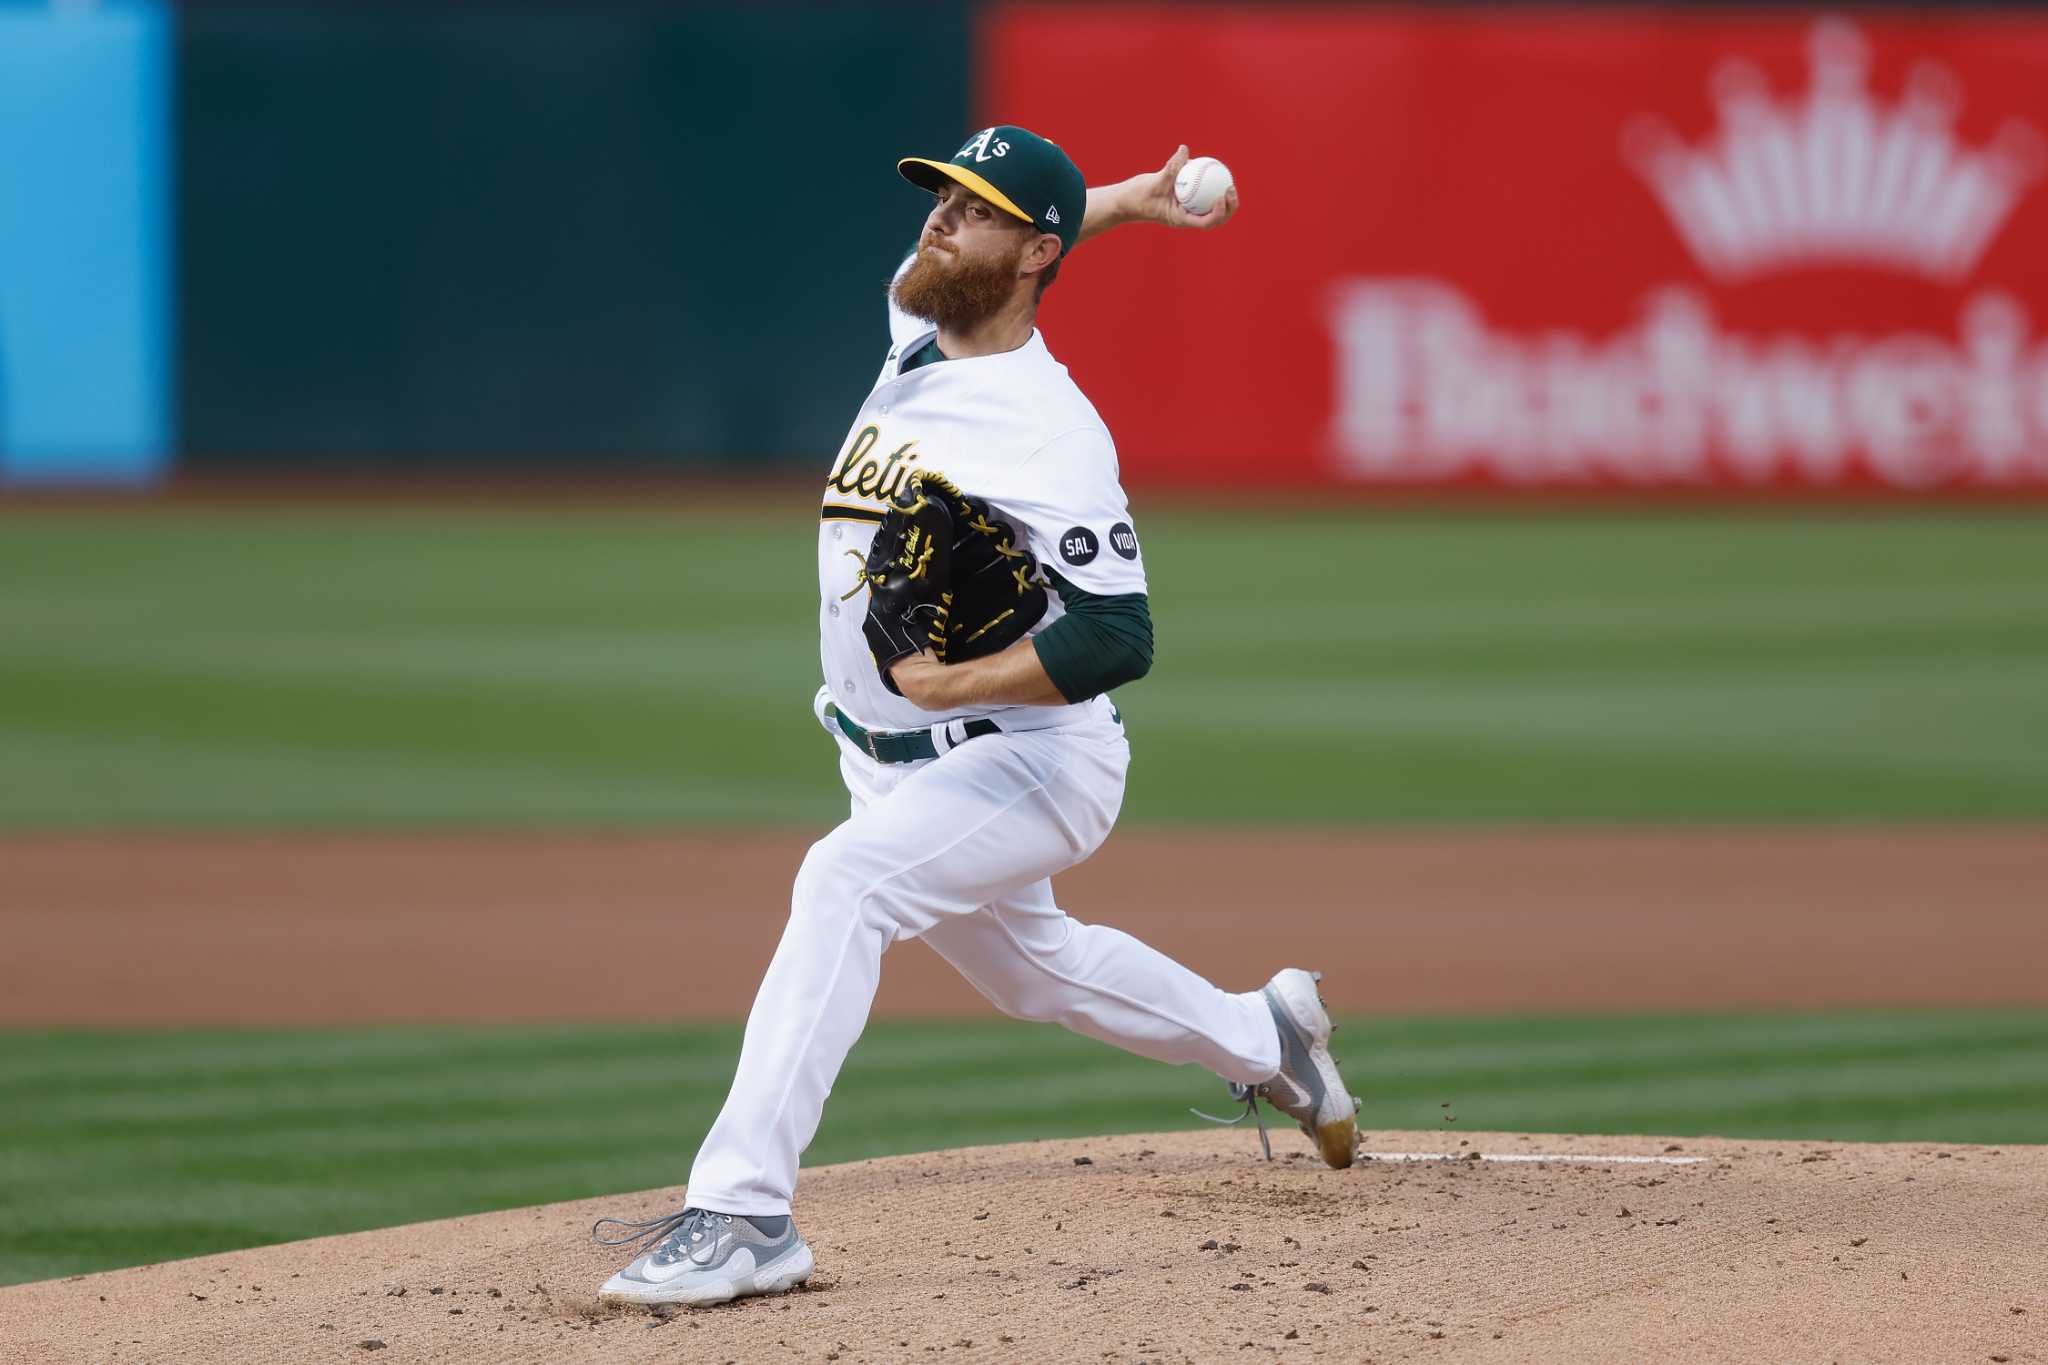 Paul Blackburn pitches Athletics to 2-1 victory over Yankees in